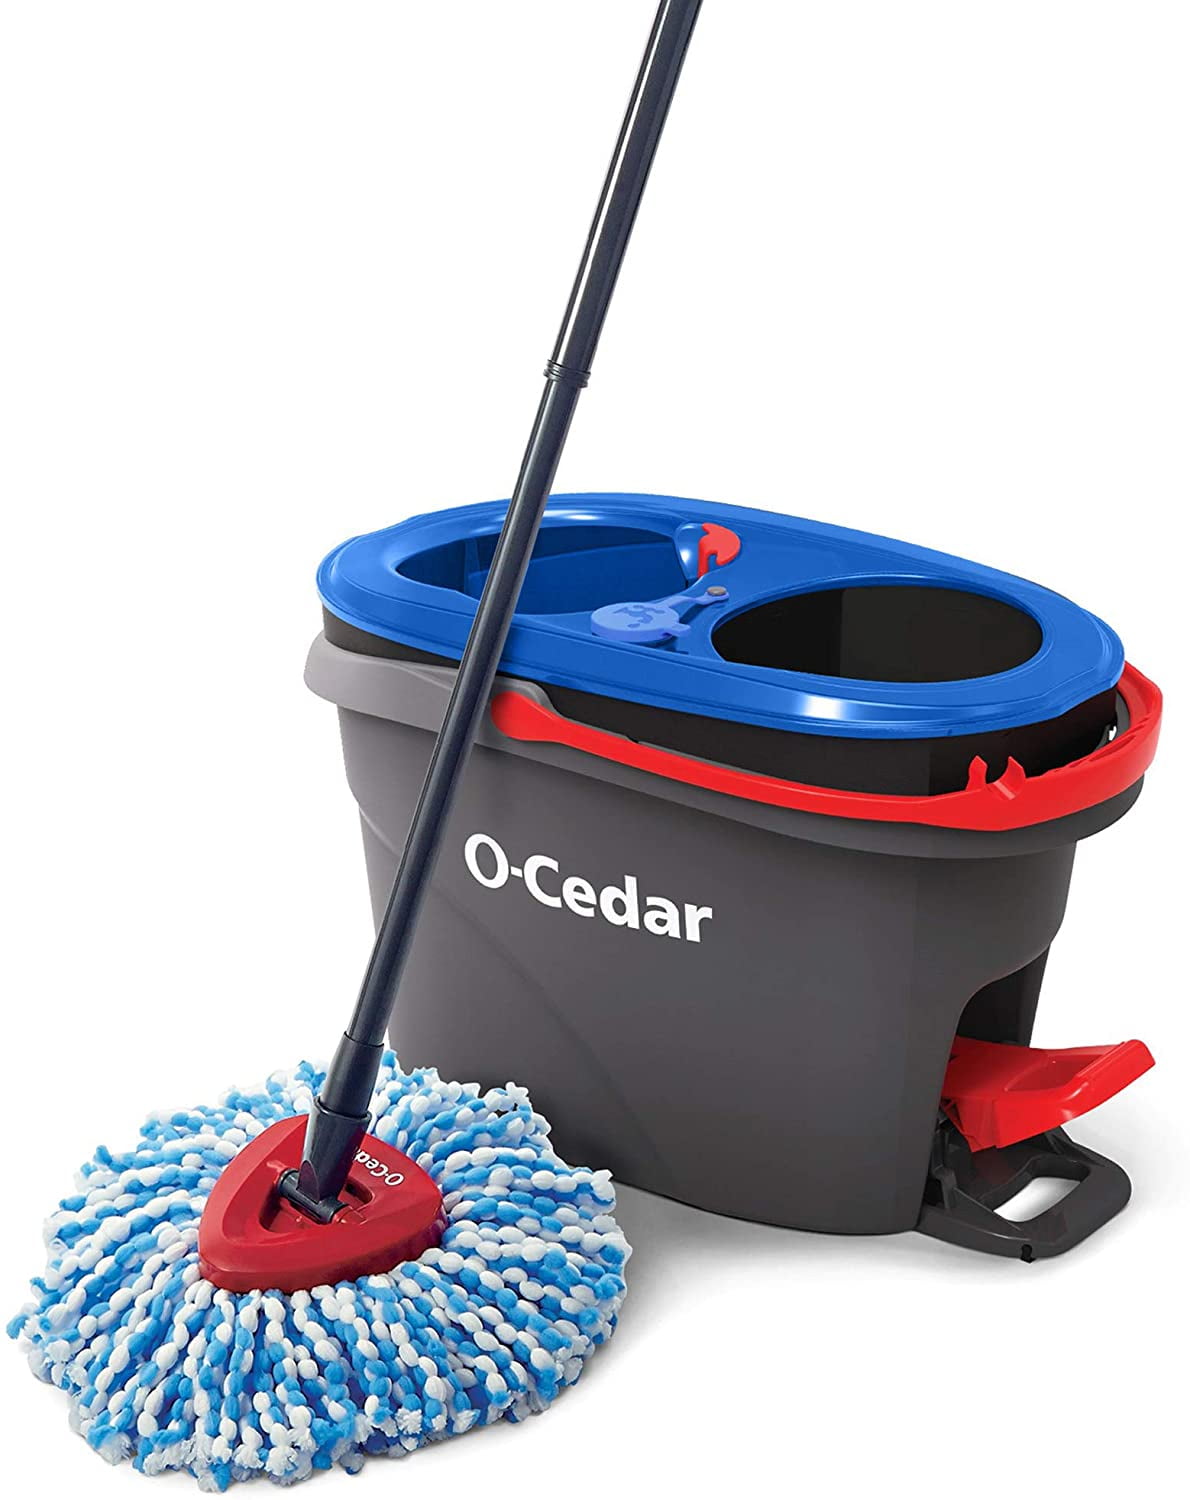  O-Cedar EasyWring Microfiber Spin Mop, Bucket Floor Cleaning  System, Red, Gray & Scrunge Multi-Use (Pack of 6) Non-Scratch,  Odor-Resistant All-Purpose Scrubbing Sponge, 6 Count (Pack of 1), Blue :  Health 